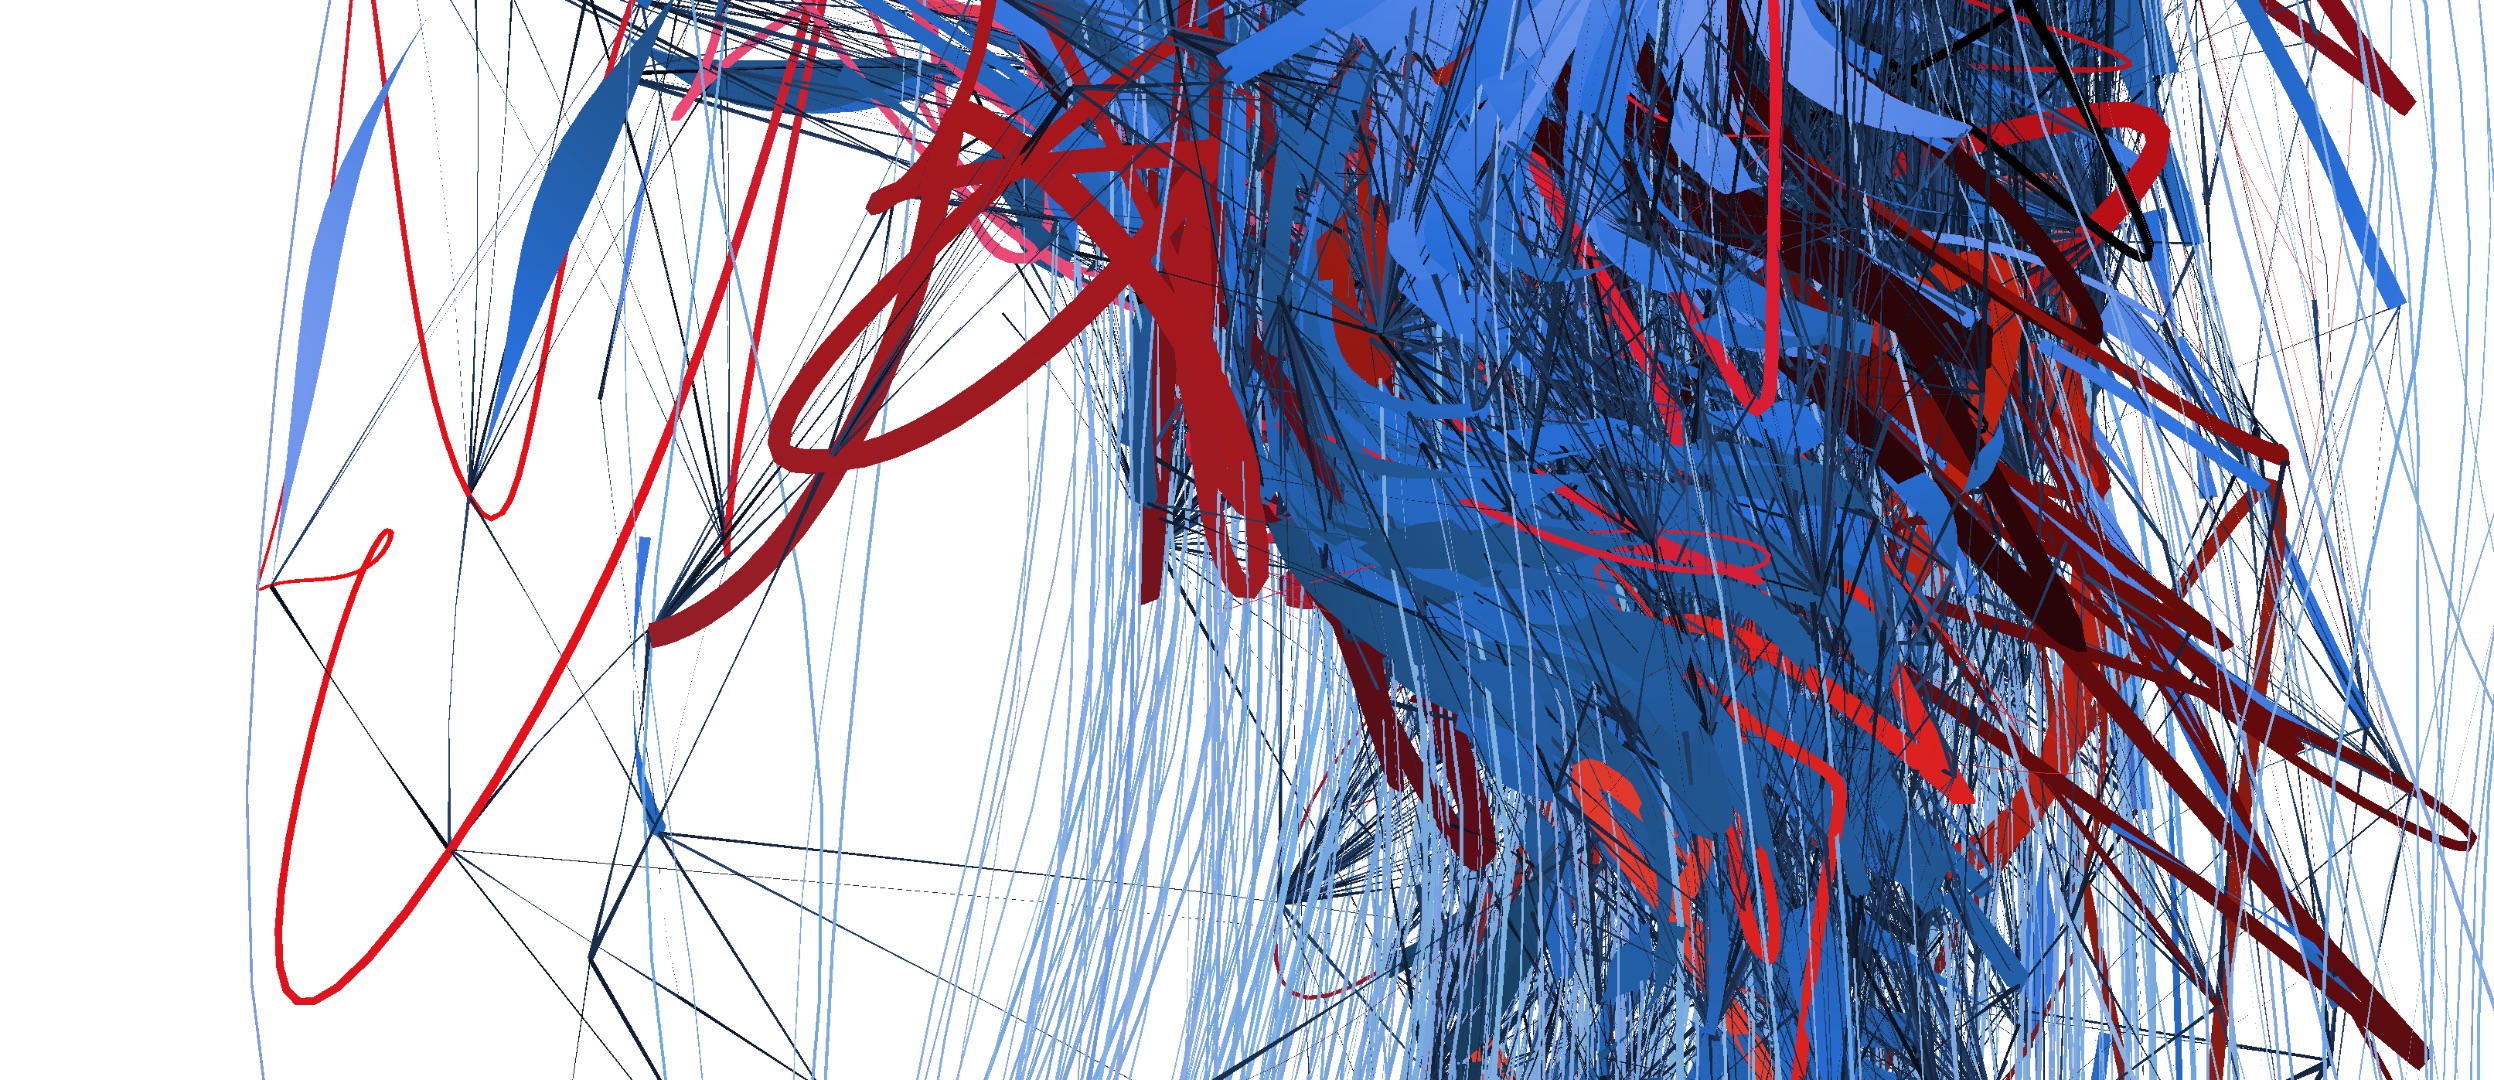 A detail of Facebook's graph in _Unwelcome Gaze_. Thin darker lines represent the actual routing graph, while thicker ones (blue and red) are painted layers of perception obscuring the actual data.